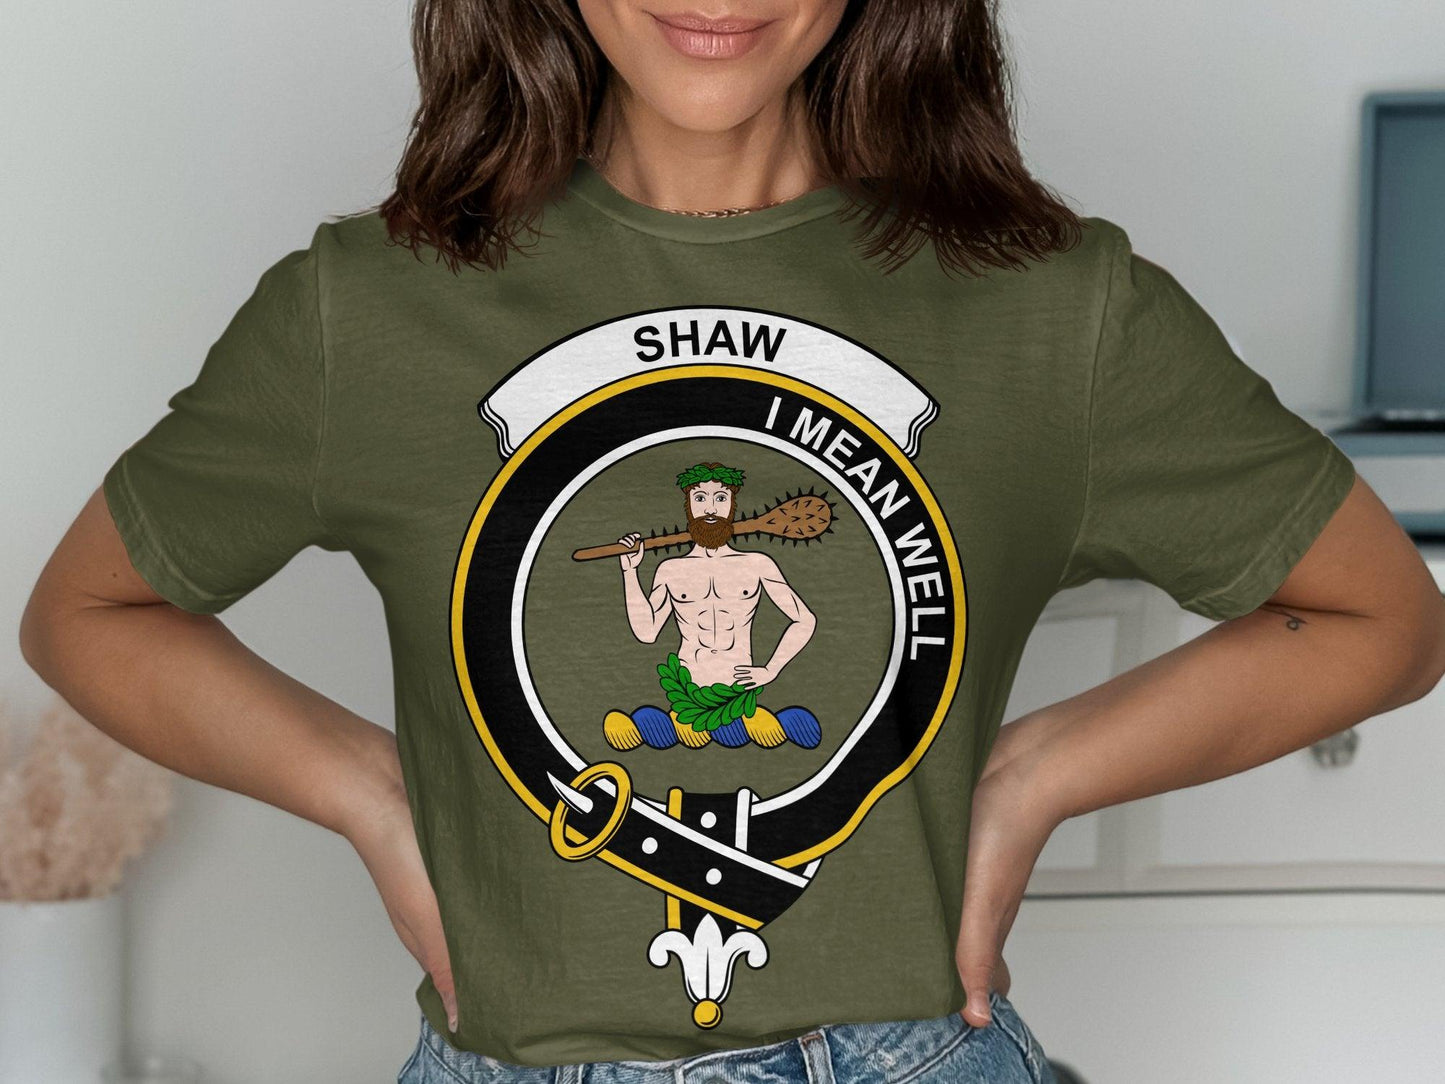 Shaw Clan Crest I Mean Well Scottish Festival T-Shirt - Living Stone Gifts